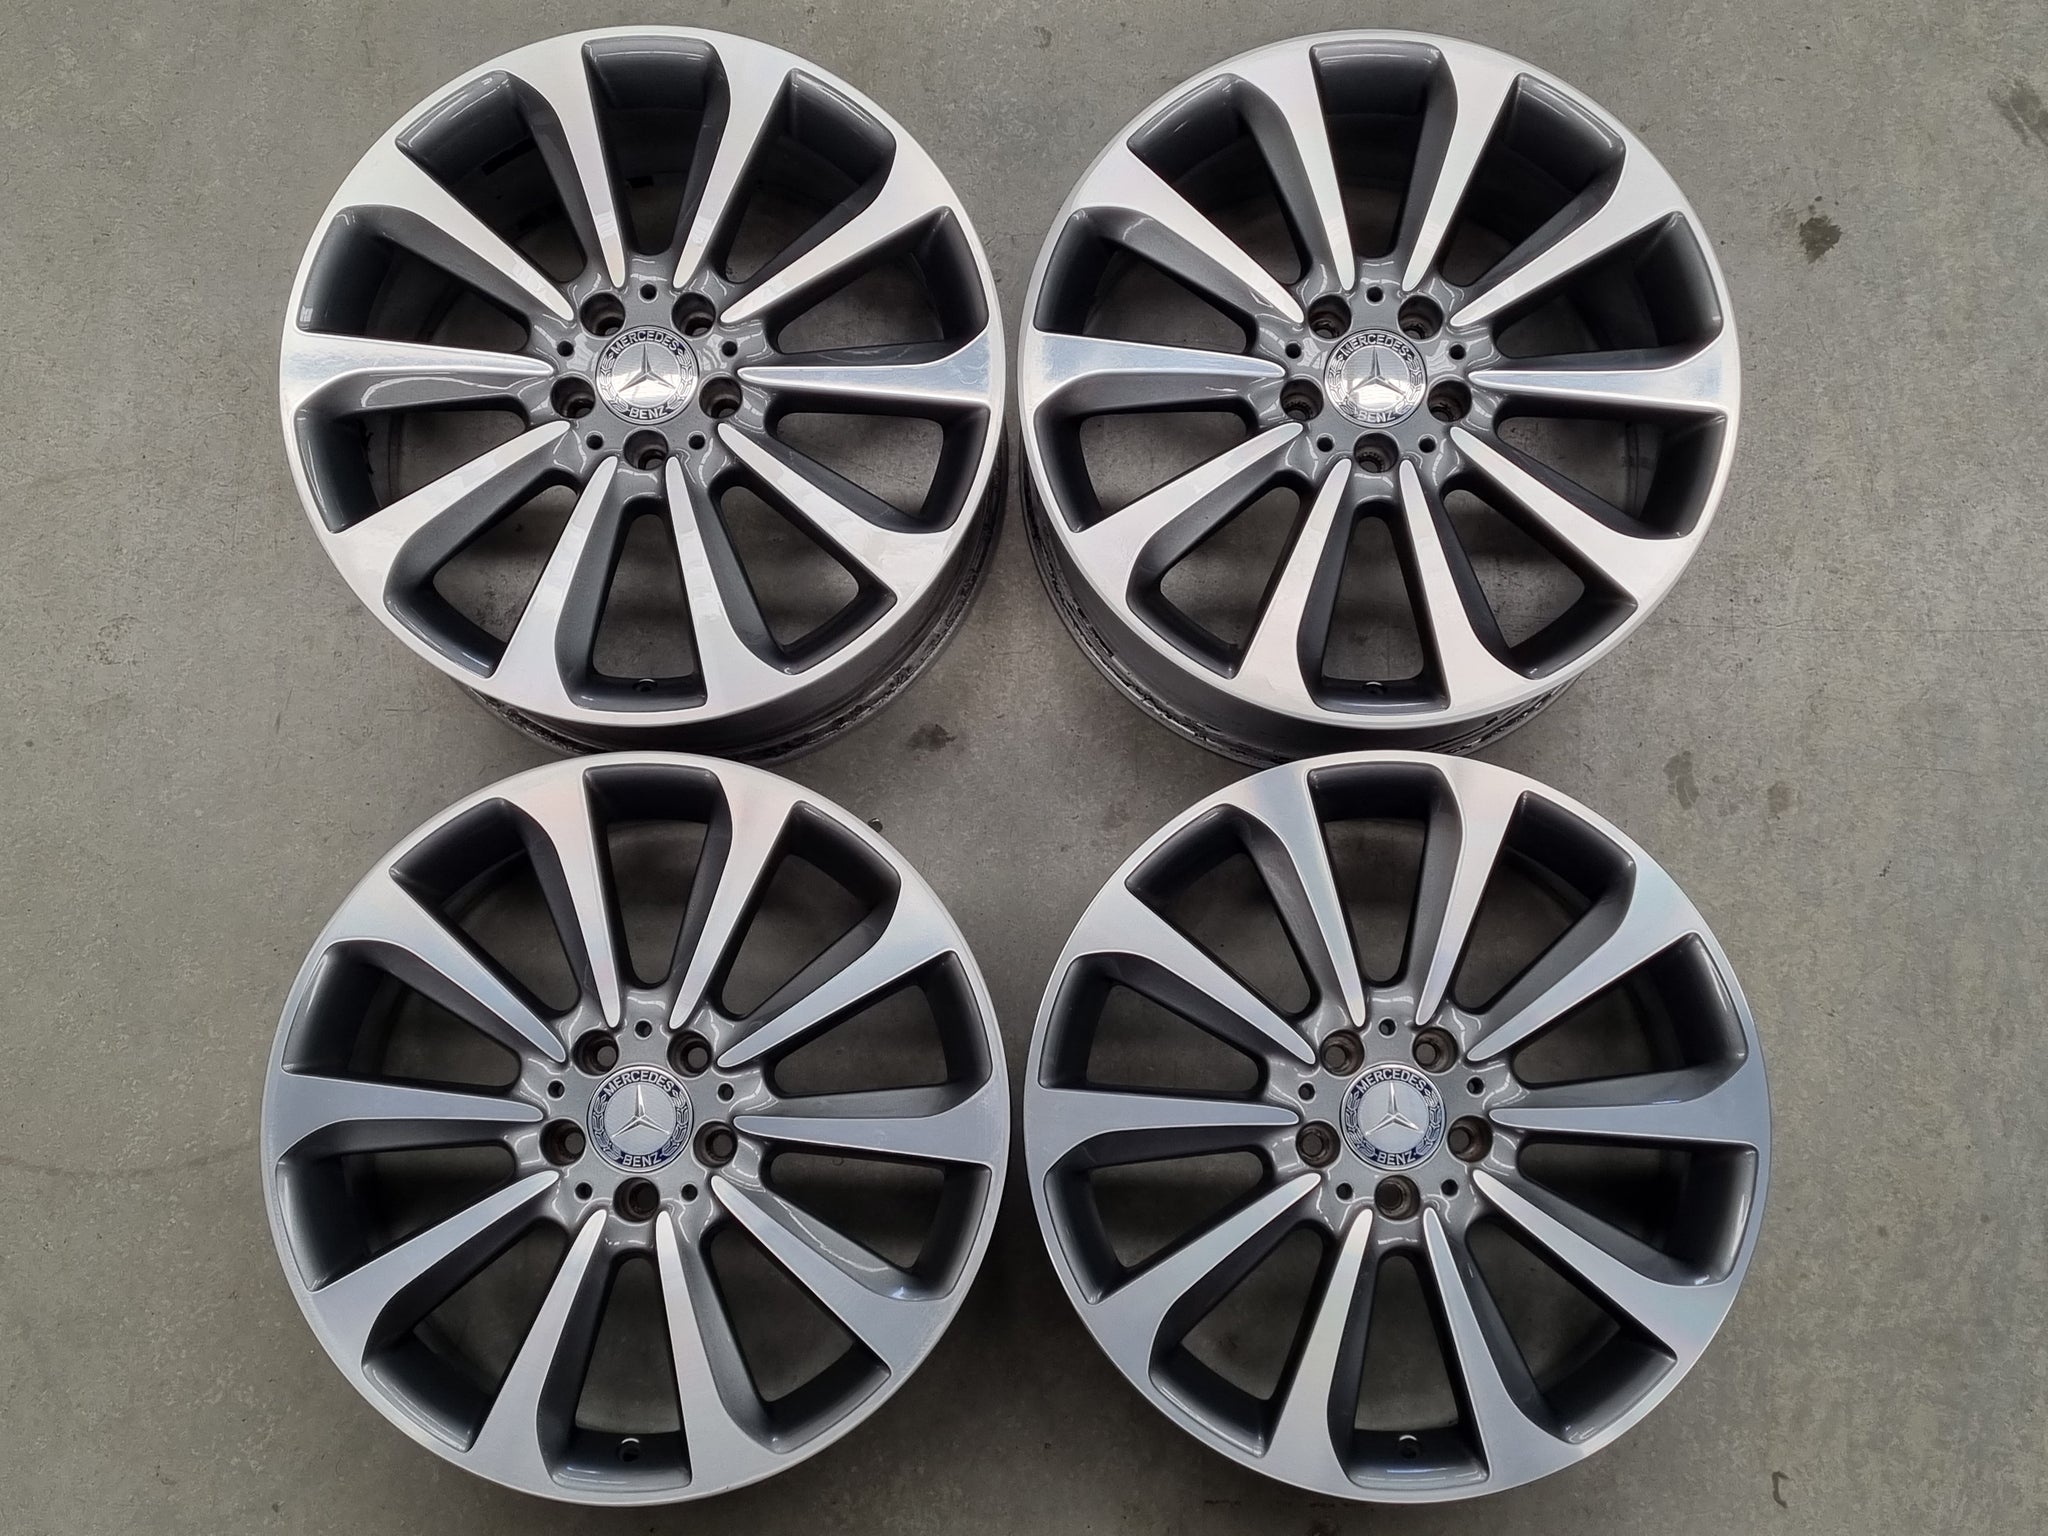 Load image into Gallery viewer, Genuine Mercedes Benz C250 W205 19 Inch Wheels Set of 4
